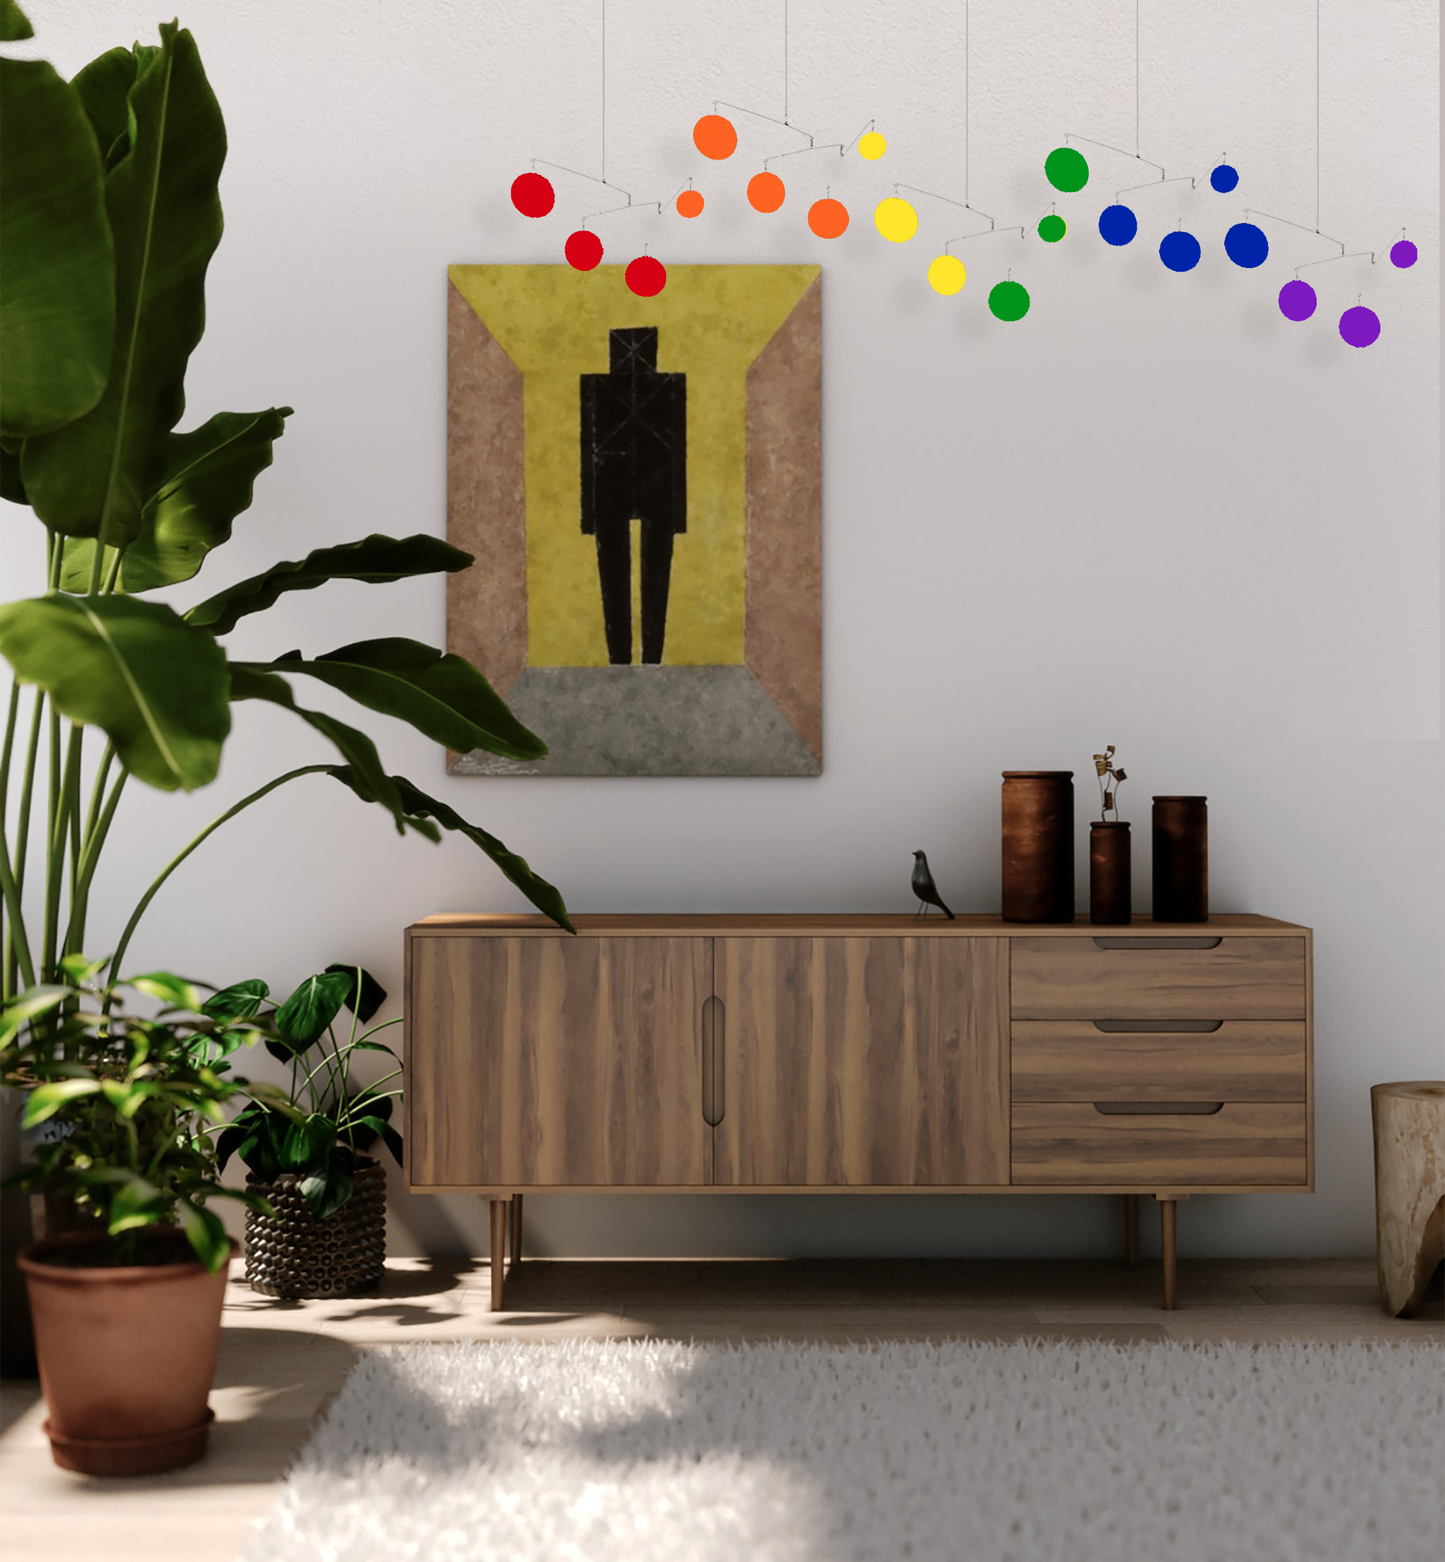 The Atomic Mobile in mid century modern room with credenza, shag rug, plants, and modern art print - Exclusive Rainbow Pride LGBTQ+ Colors by AtomicMobiles.com - Love is Love